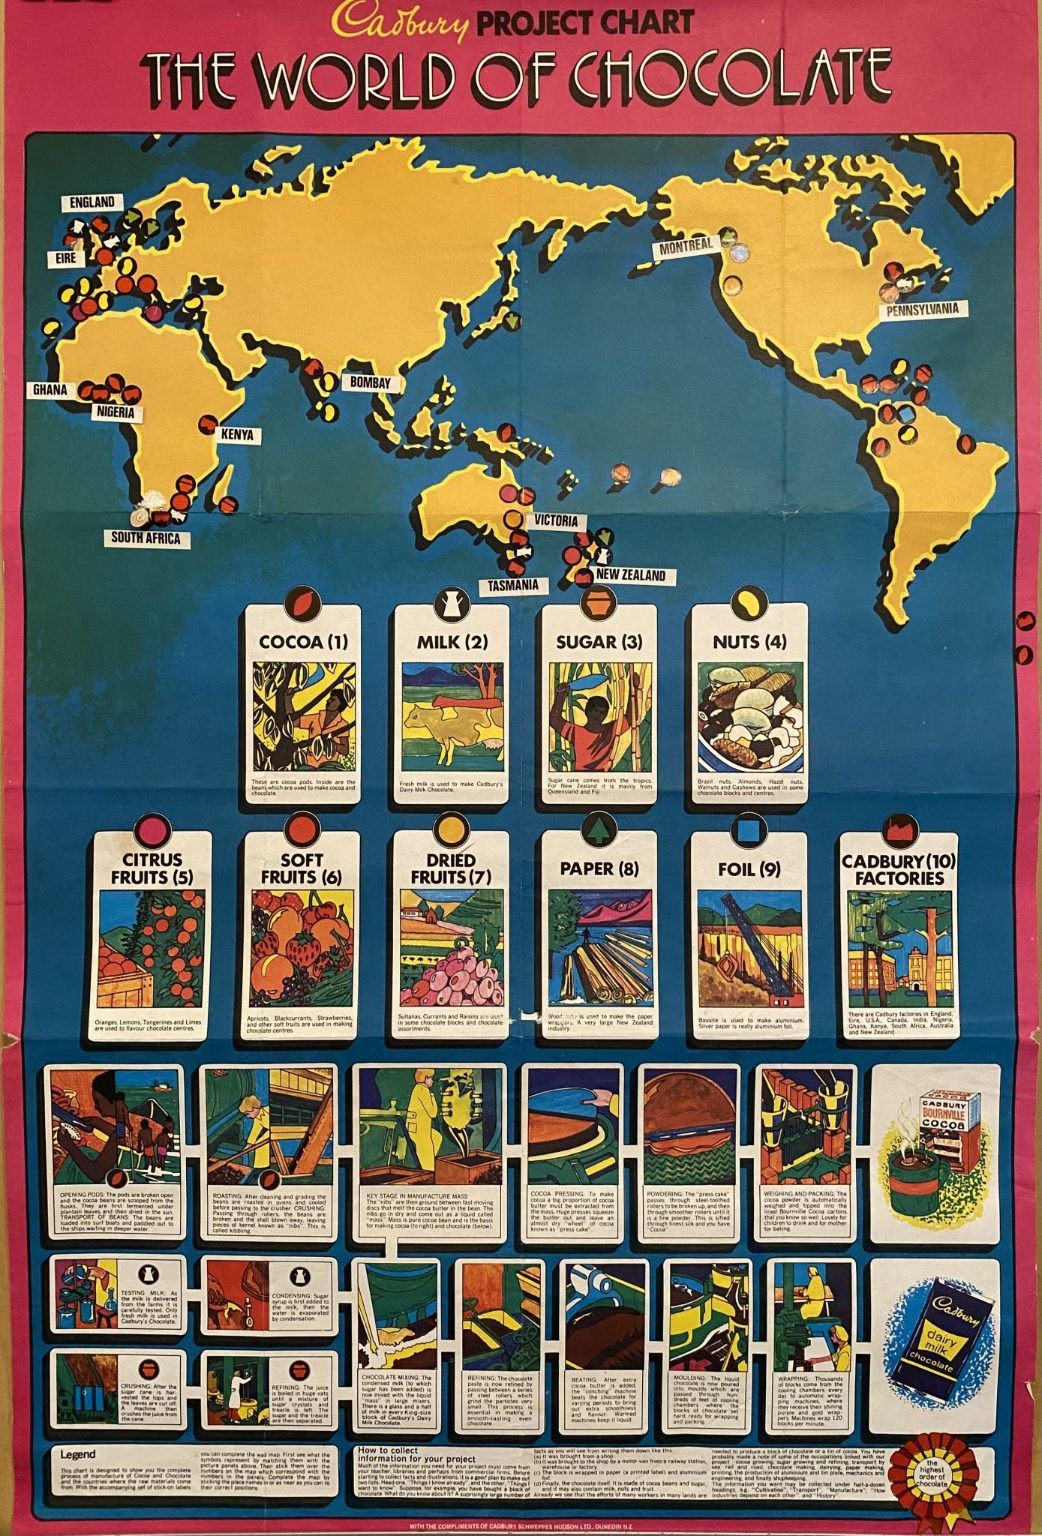 VINTAGE POSTER: Cadbury World of Chocolate - Project Chart